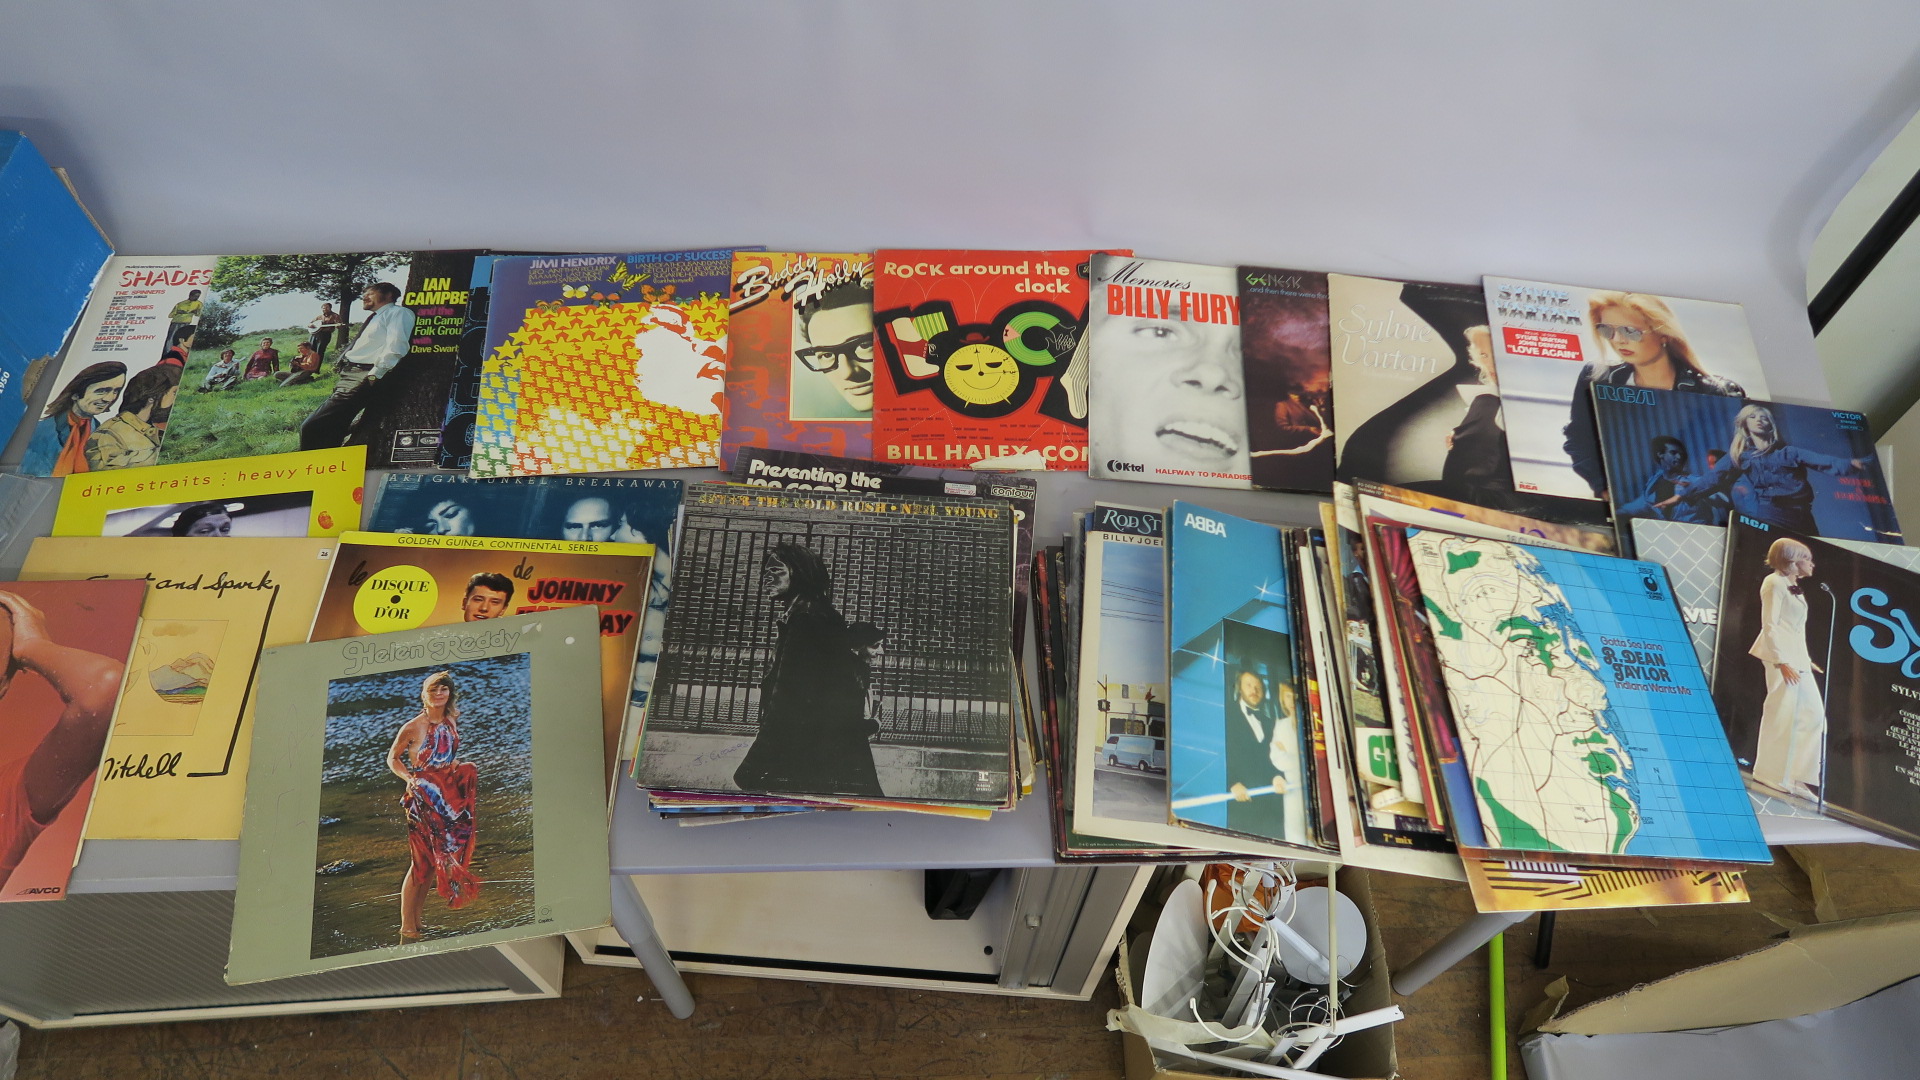 4 boxes of 7 inch singles and 1 box of LPs - good lot with many singles in their original sleeves - Image 4 of 4